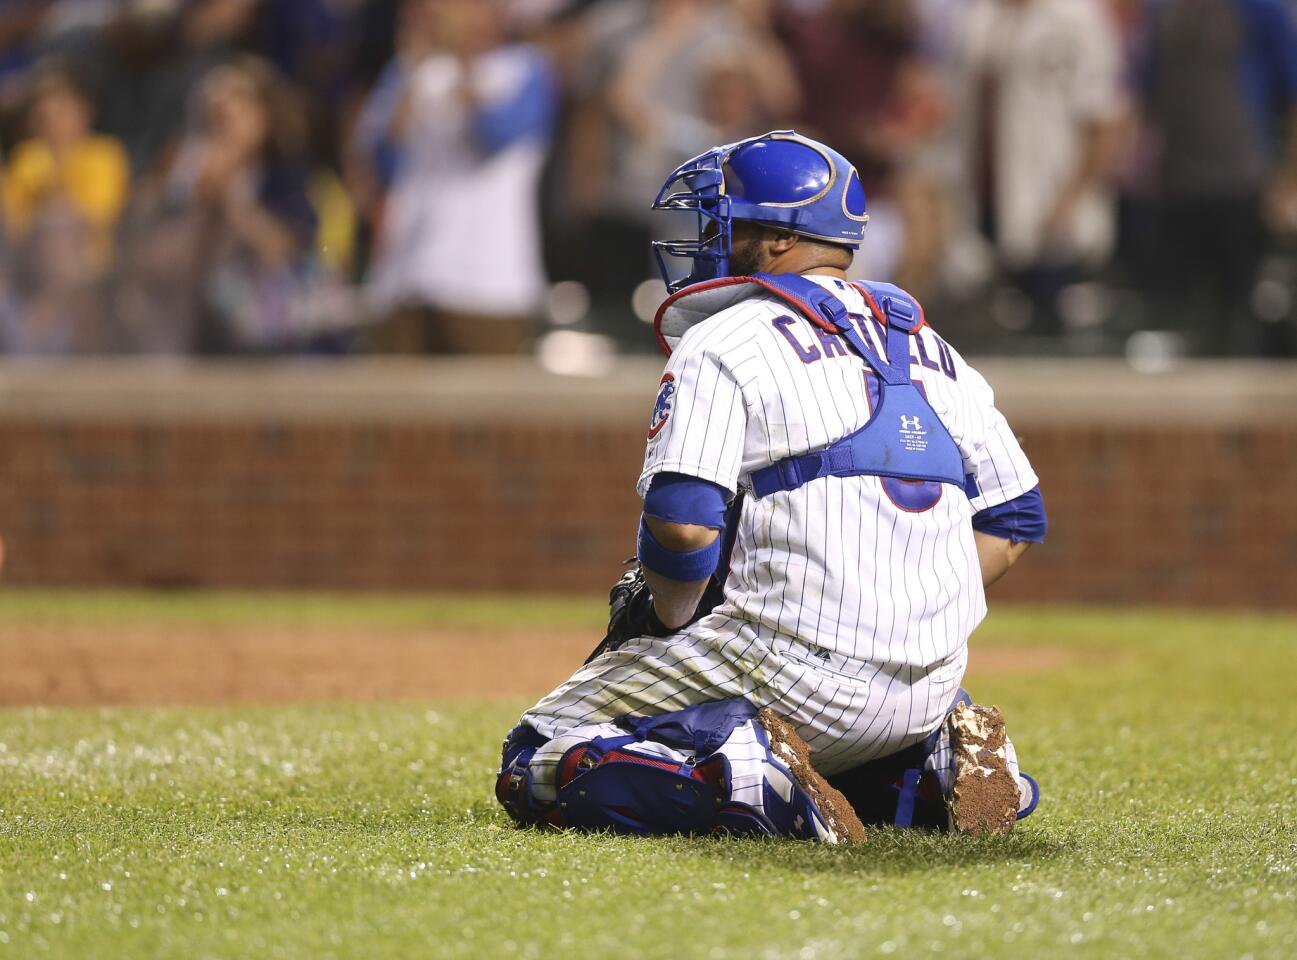 Cubs catcher Welington Castillo reacts after a run was scored by the Brewers' Aramis Ramirez during the ninth inning.